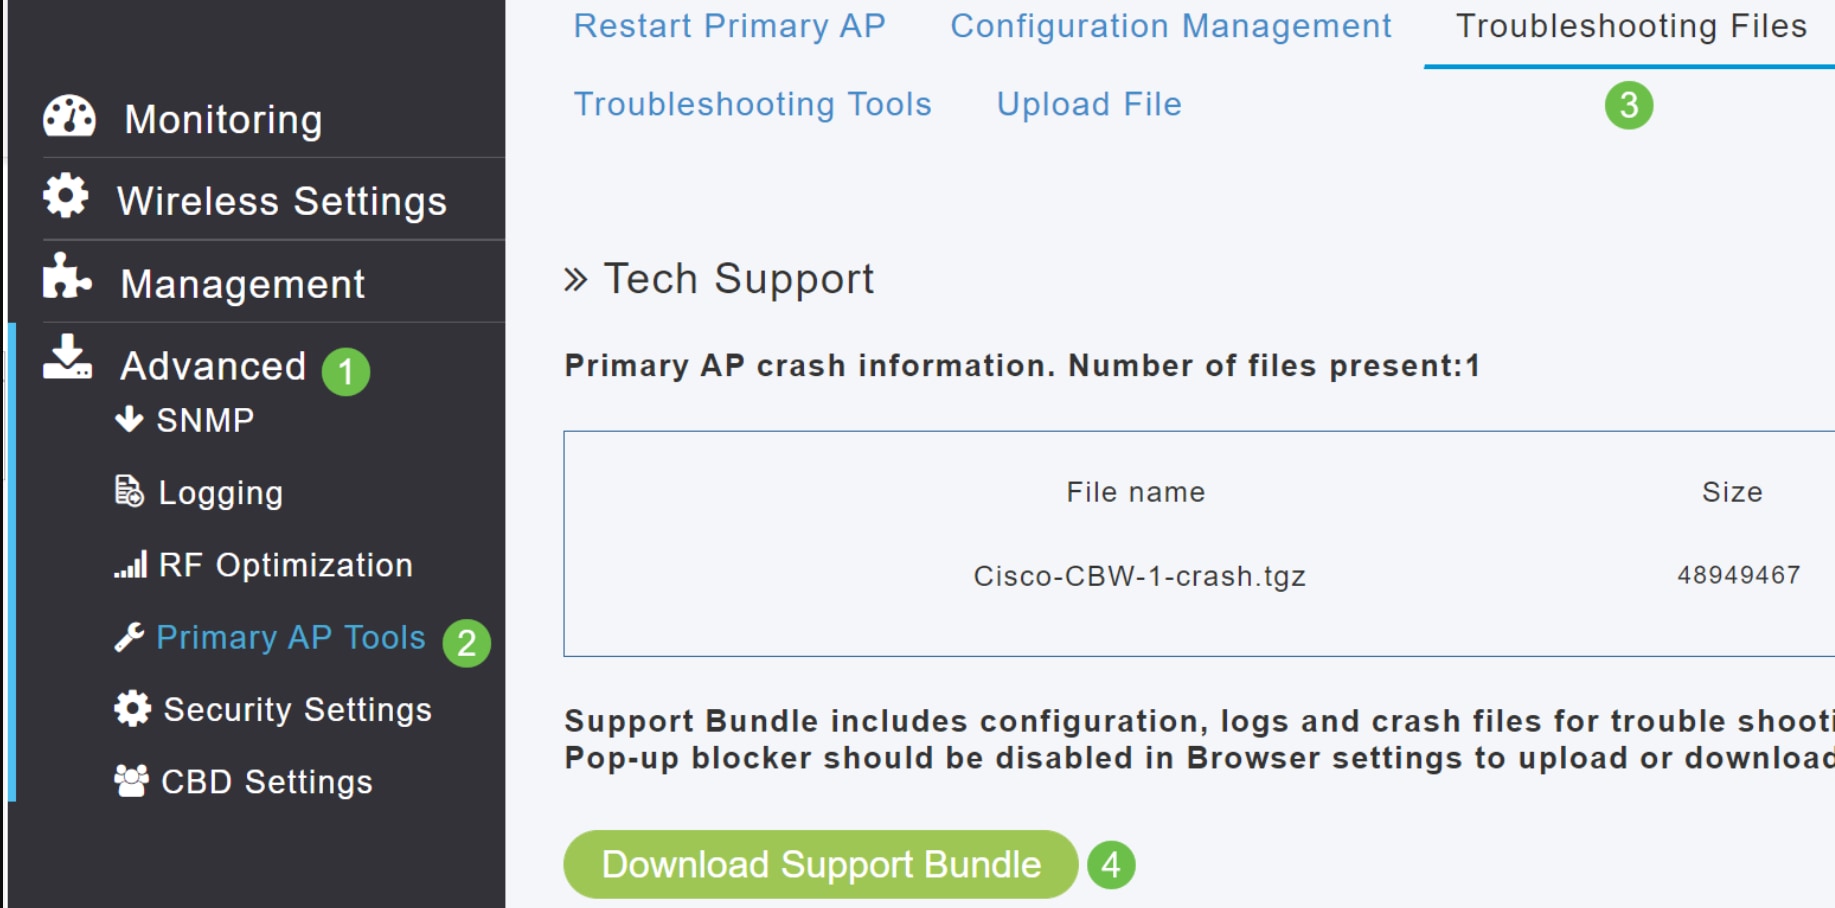 On the Web UI, navigate to Advanced > SNMP > Primary AP Tools > Troubleshooting Files > Download Support Bundle.